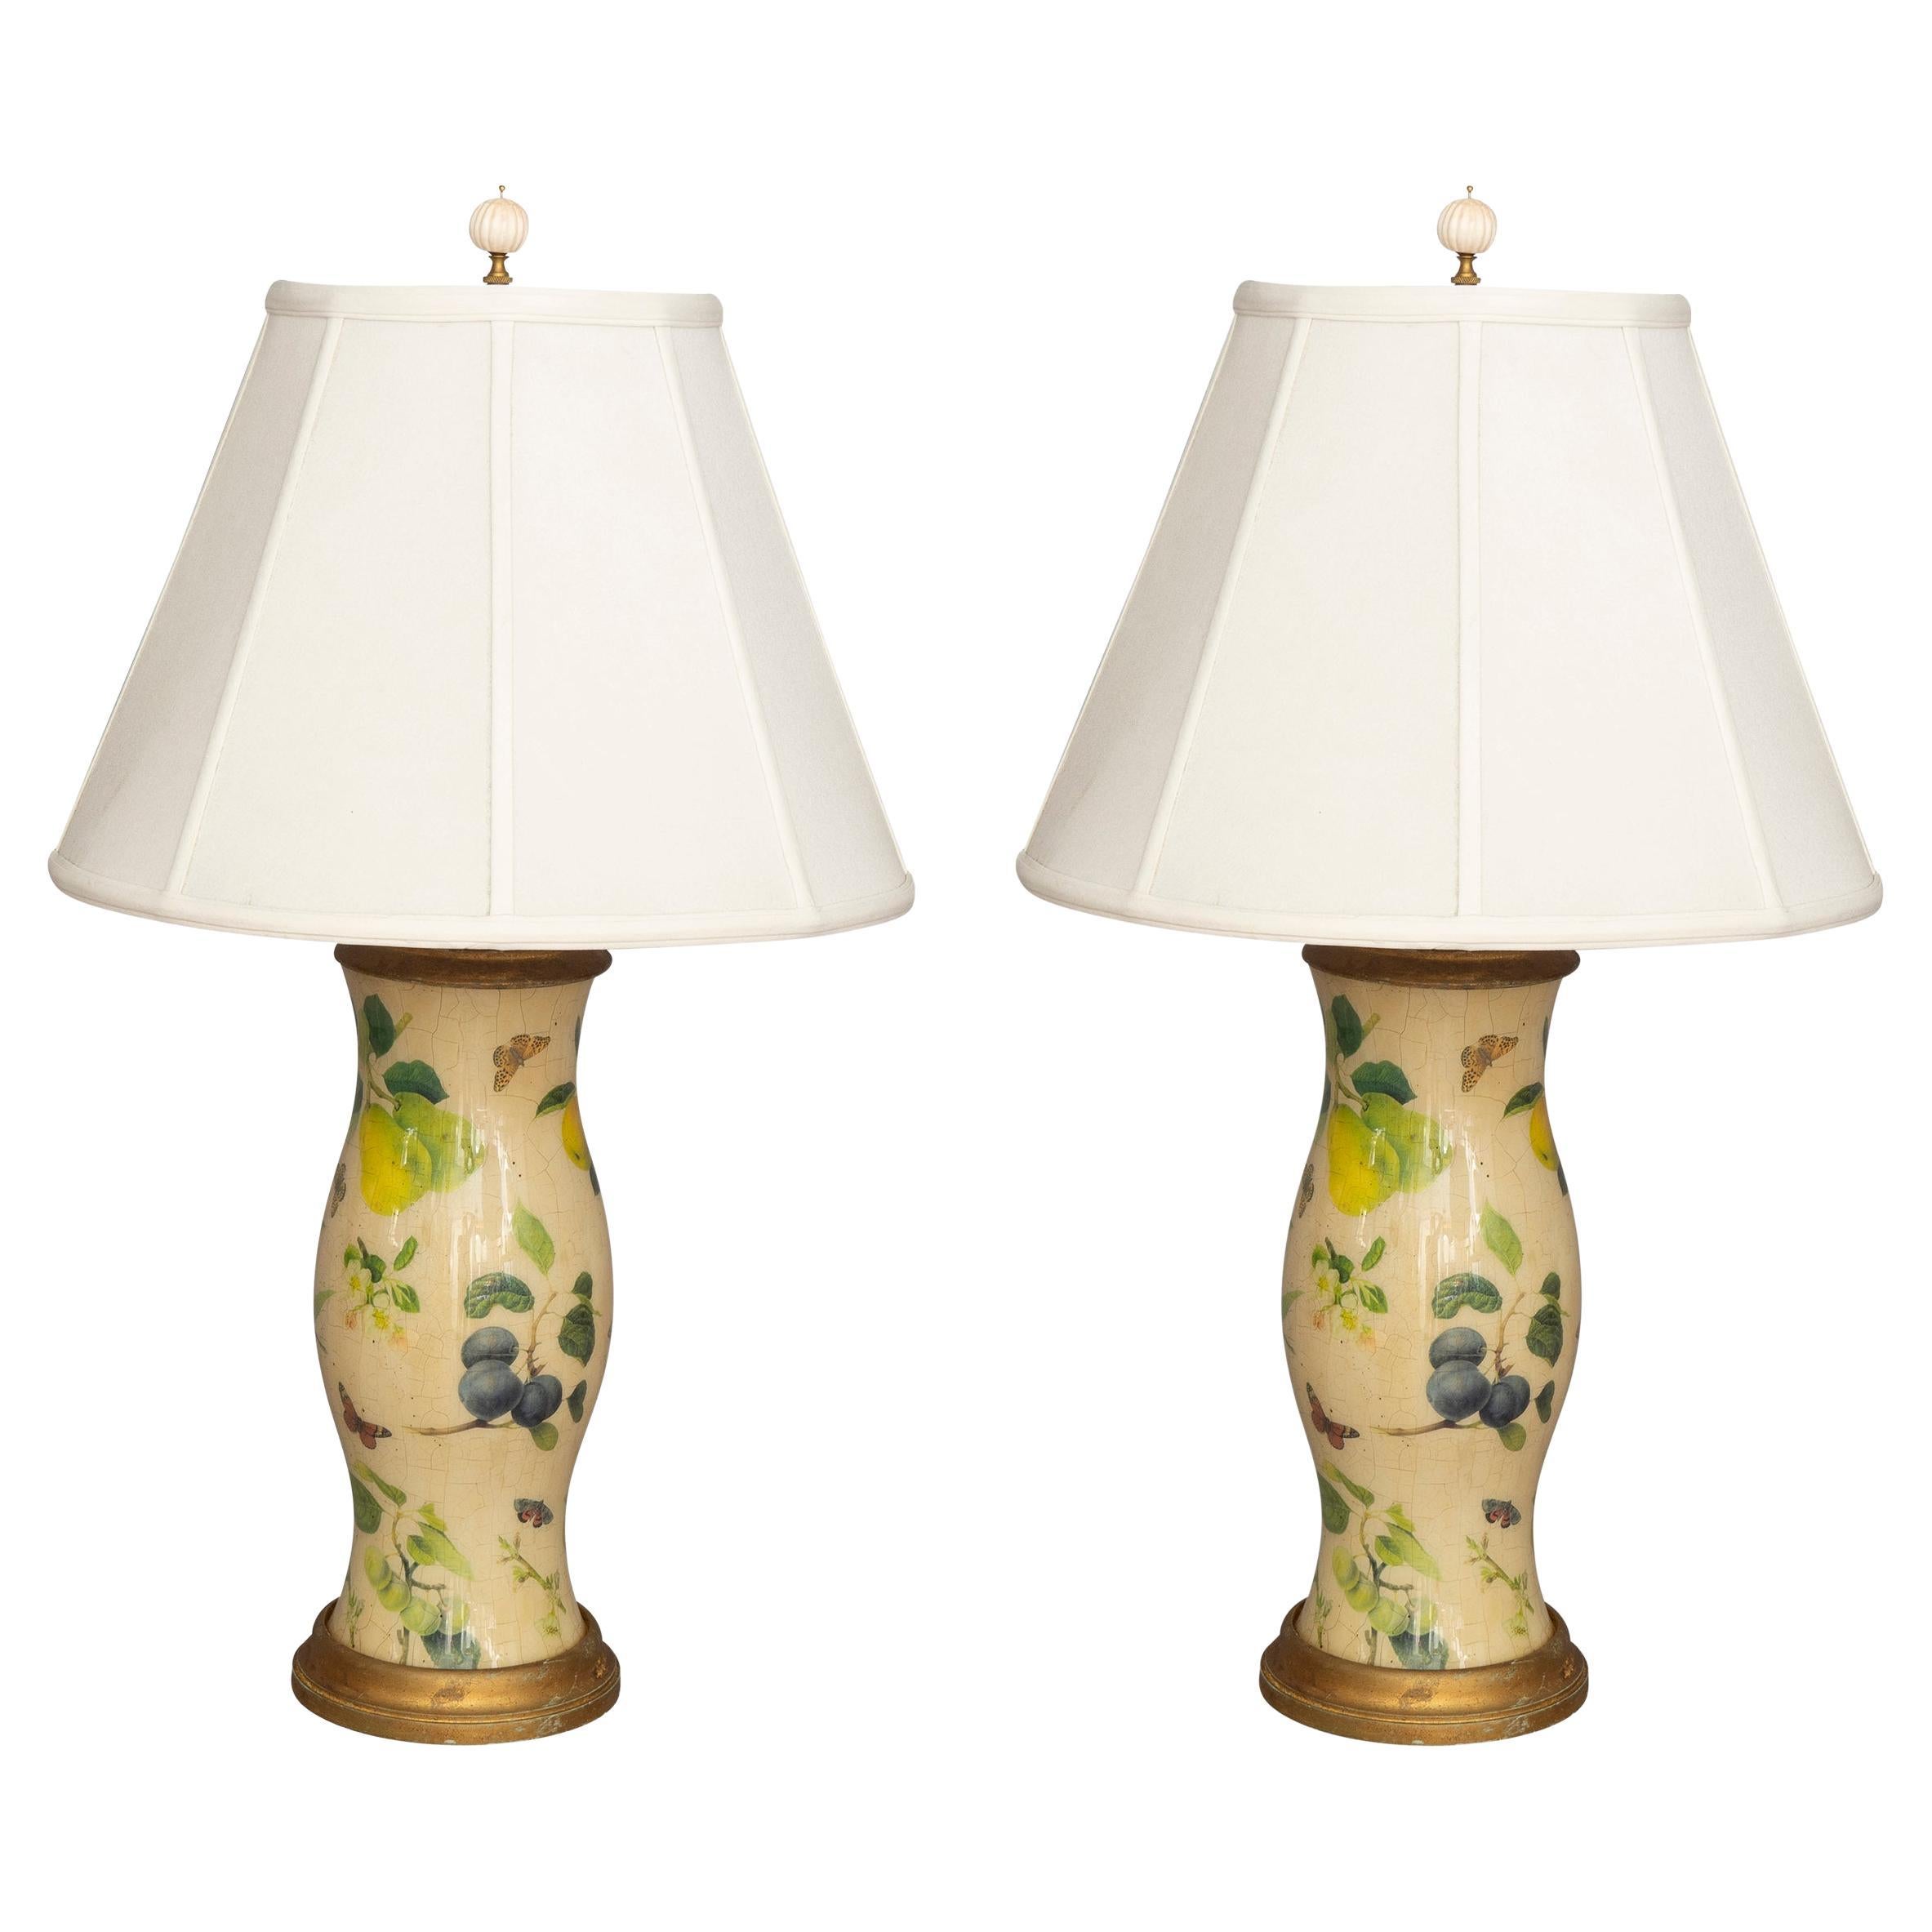 Pair of Decoupage Table Lamps